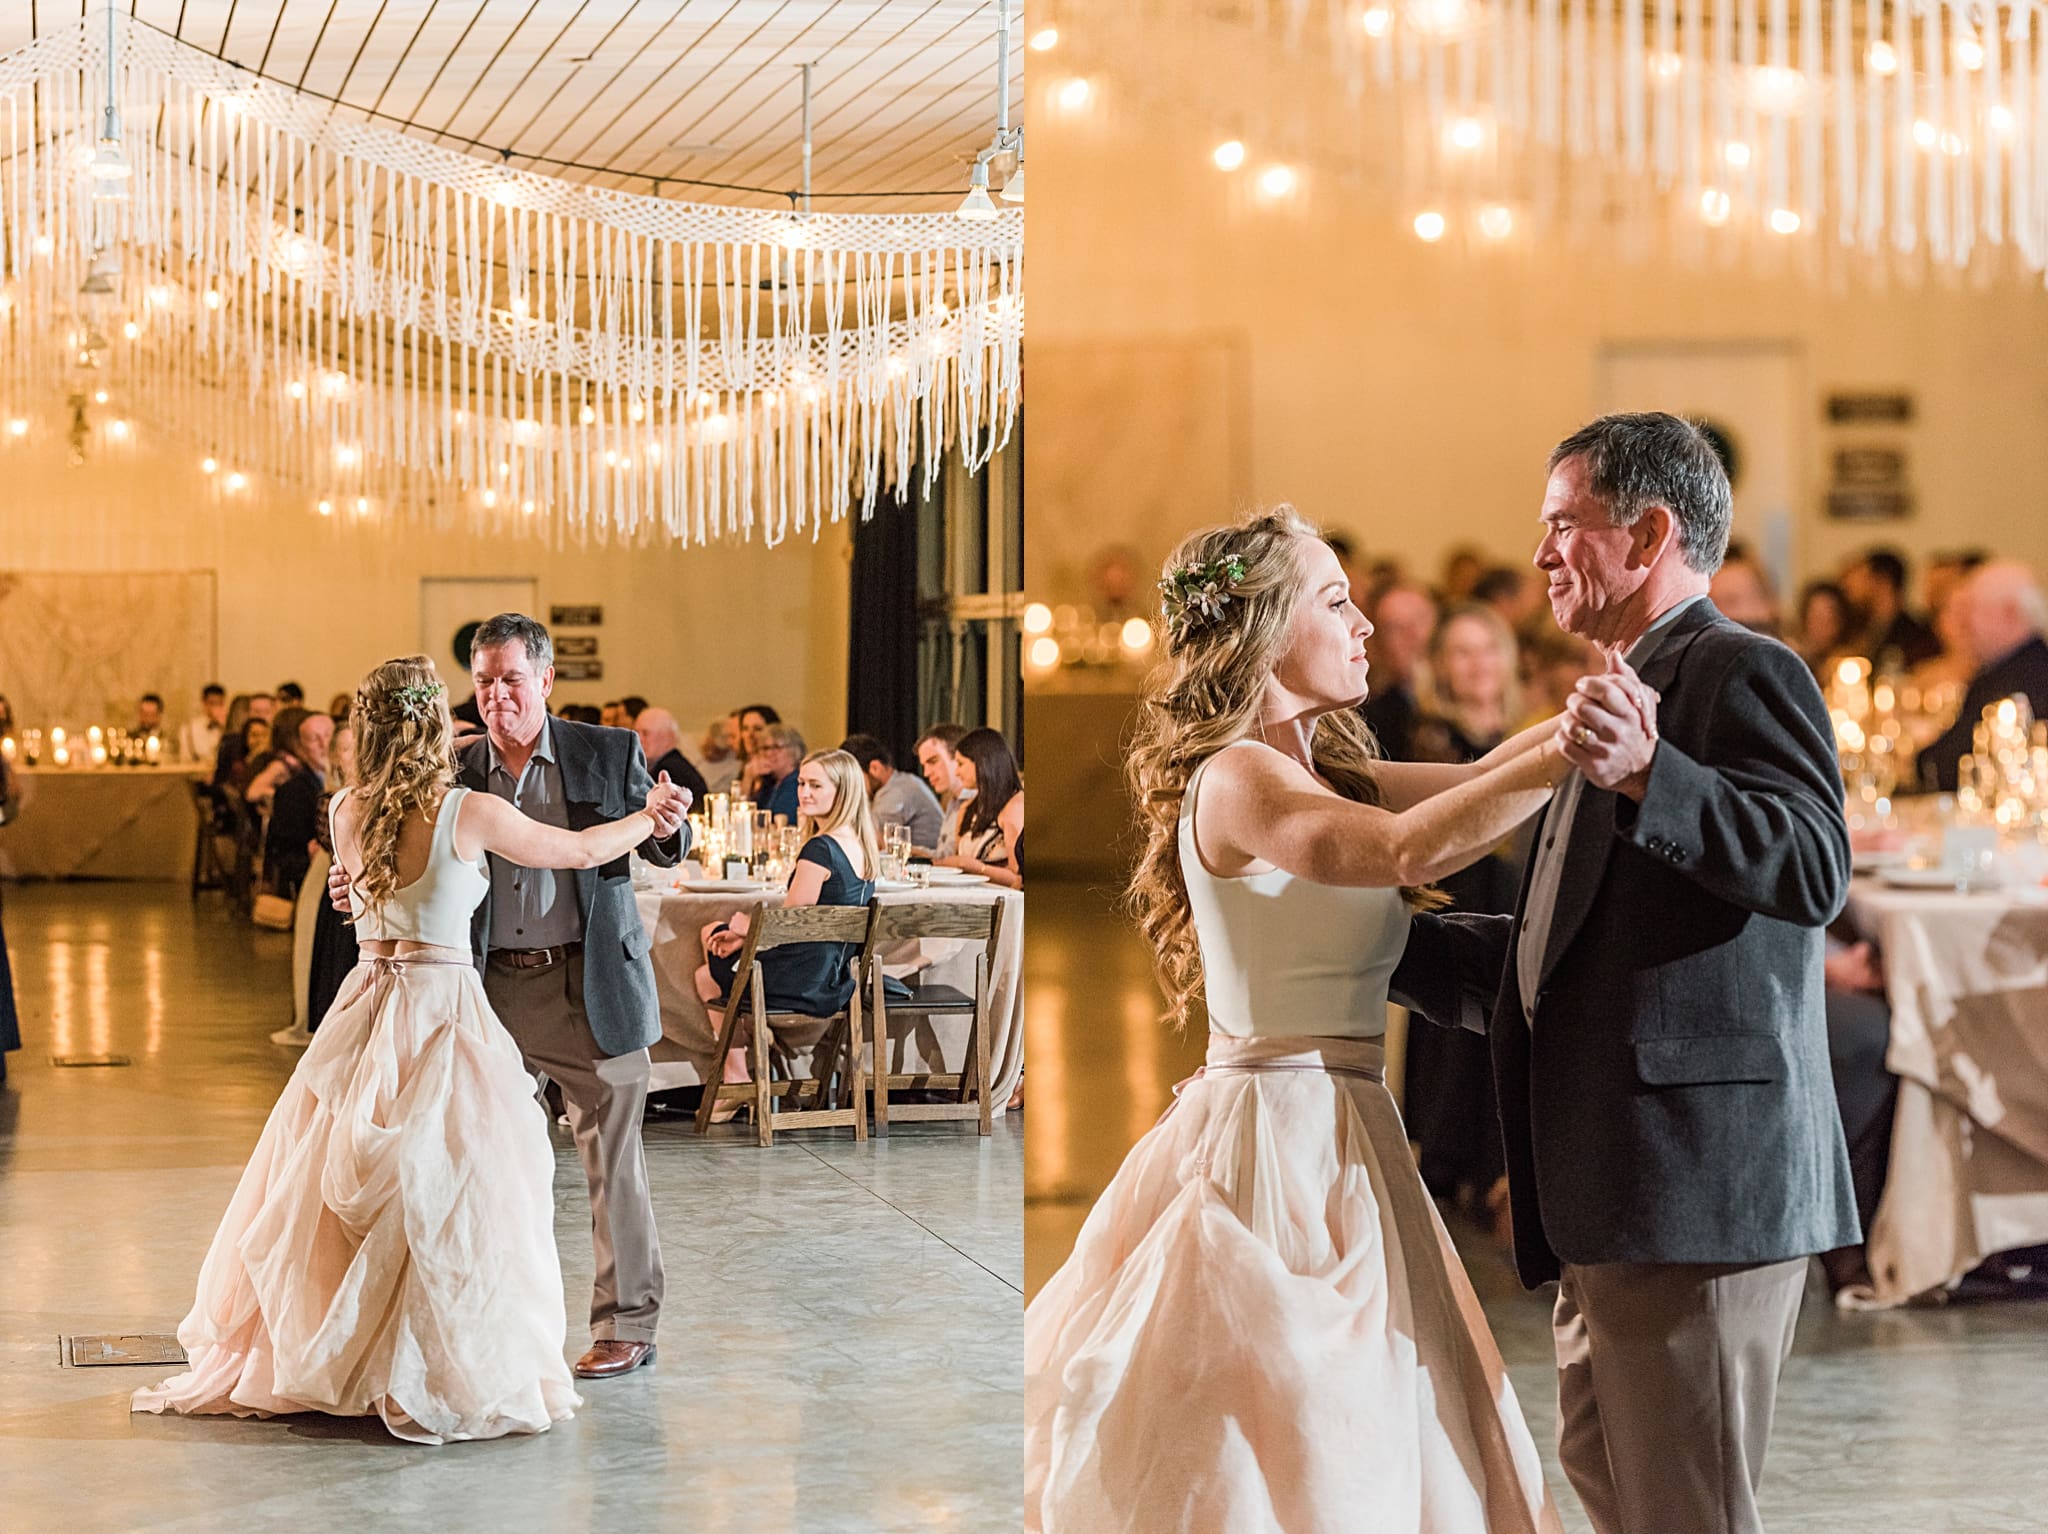 father and daughter dancing photos